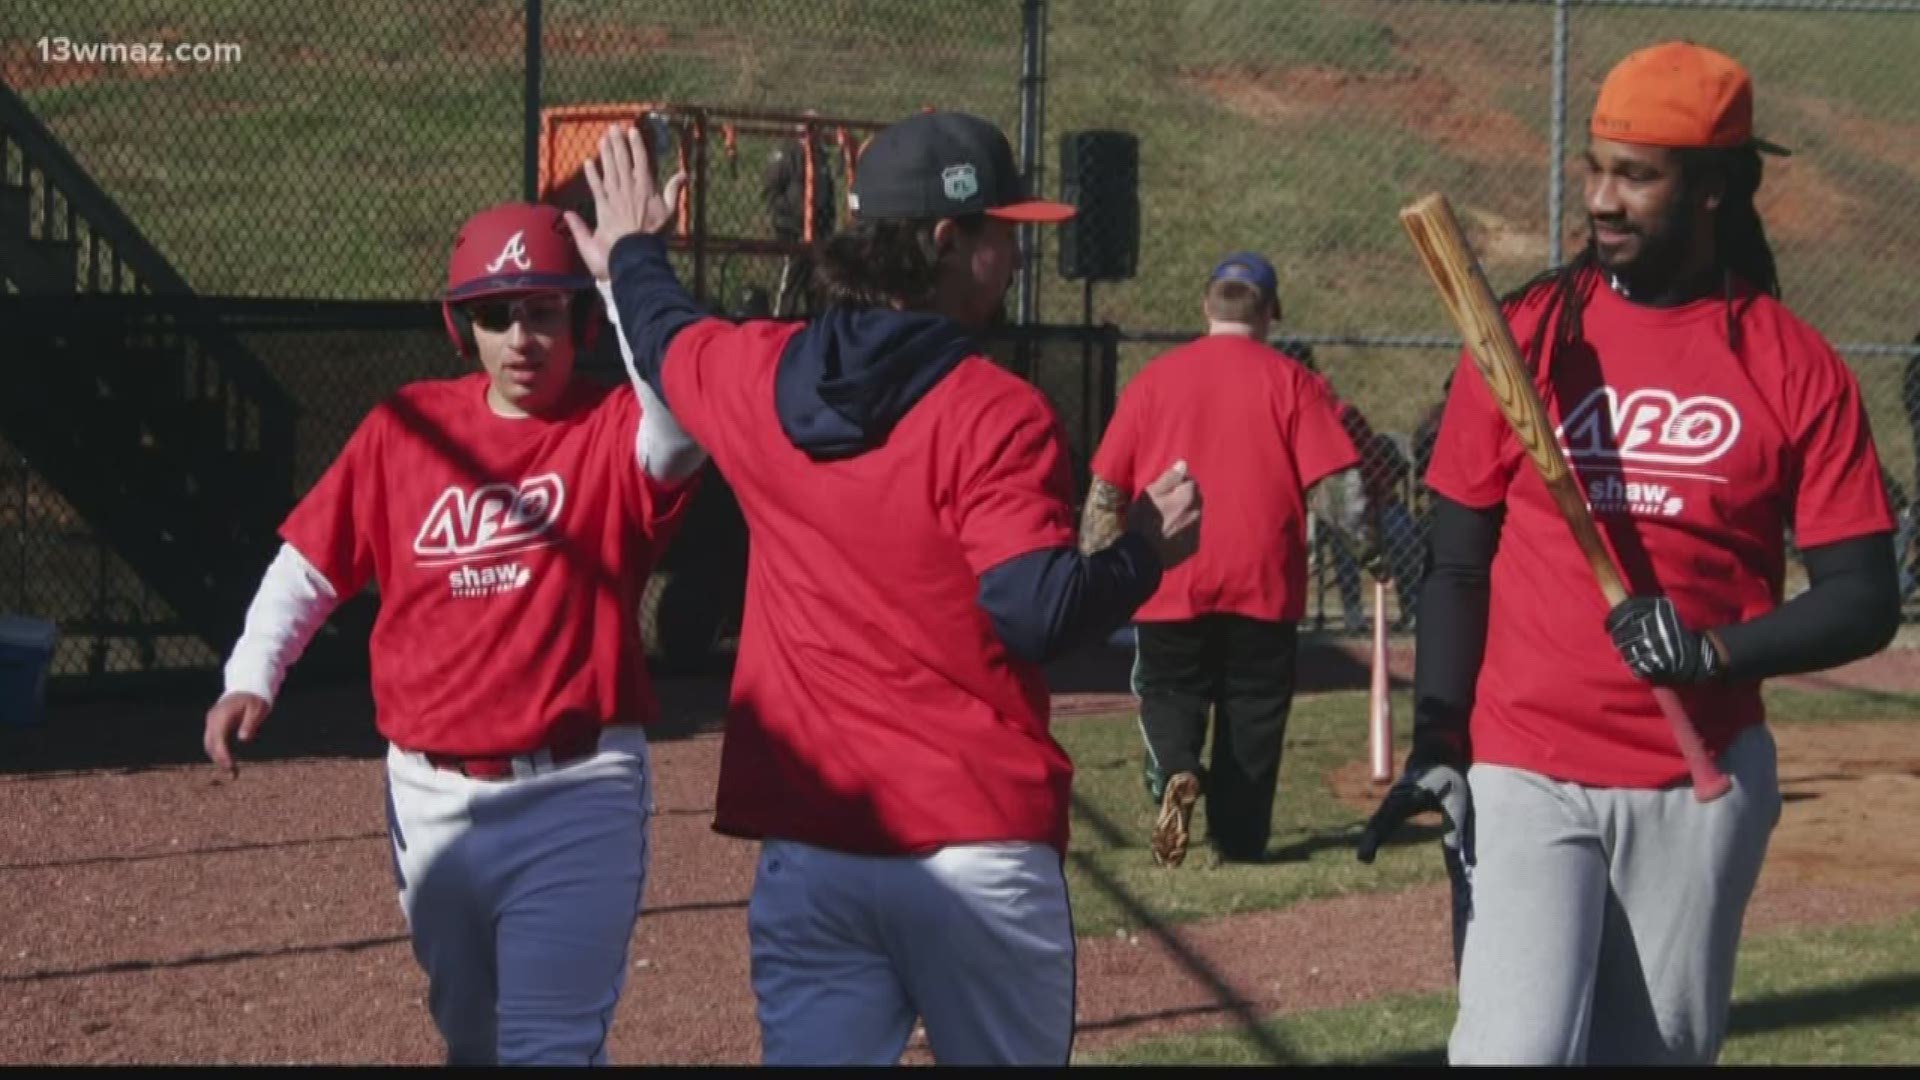 The baseball league offers a competitive atmosphere for people on the autism spectrum or with other special needs.